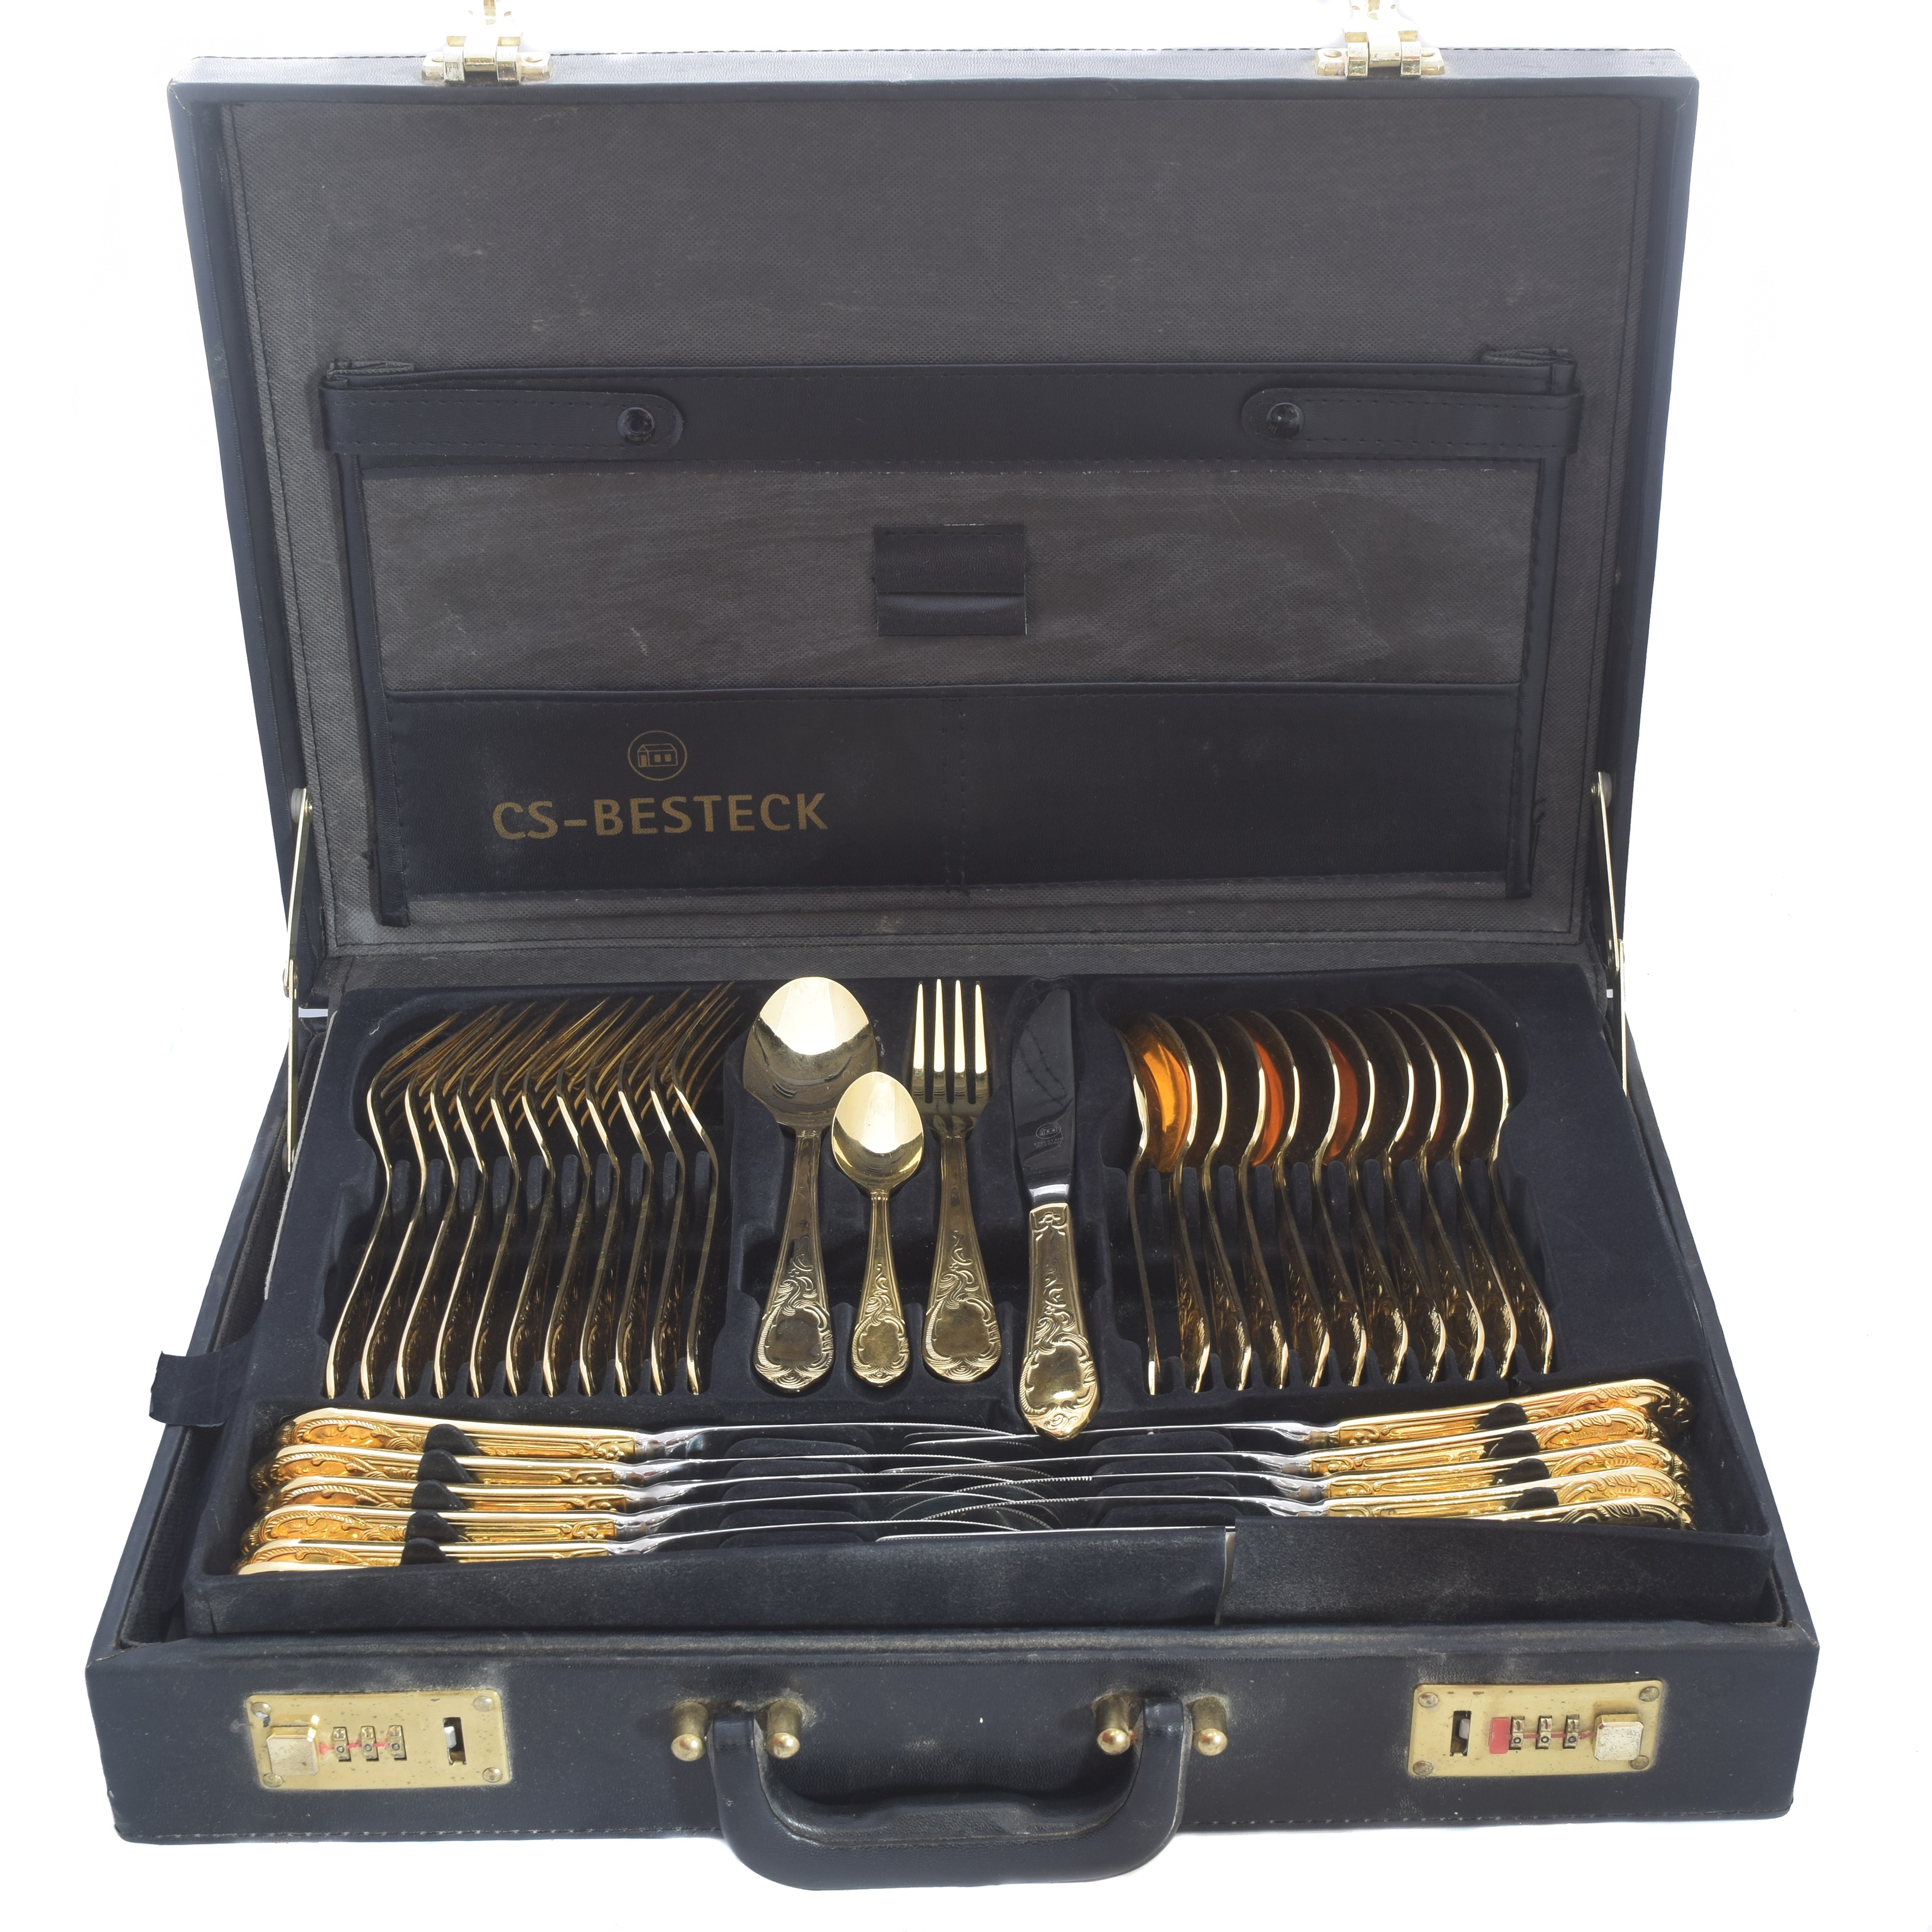 Besteck A 72 plated of - Lot canteen cased gold 24ct